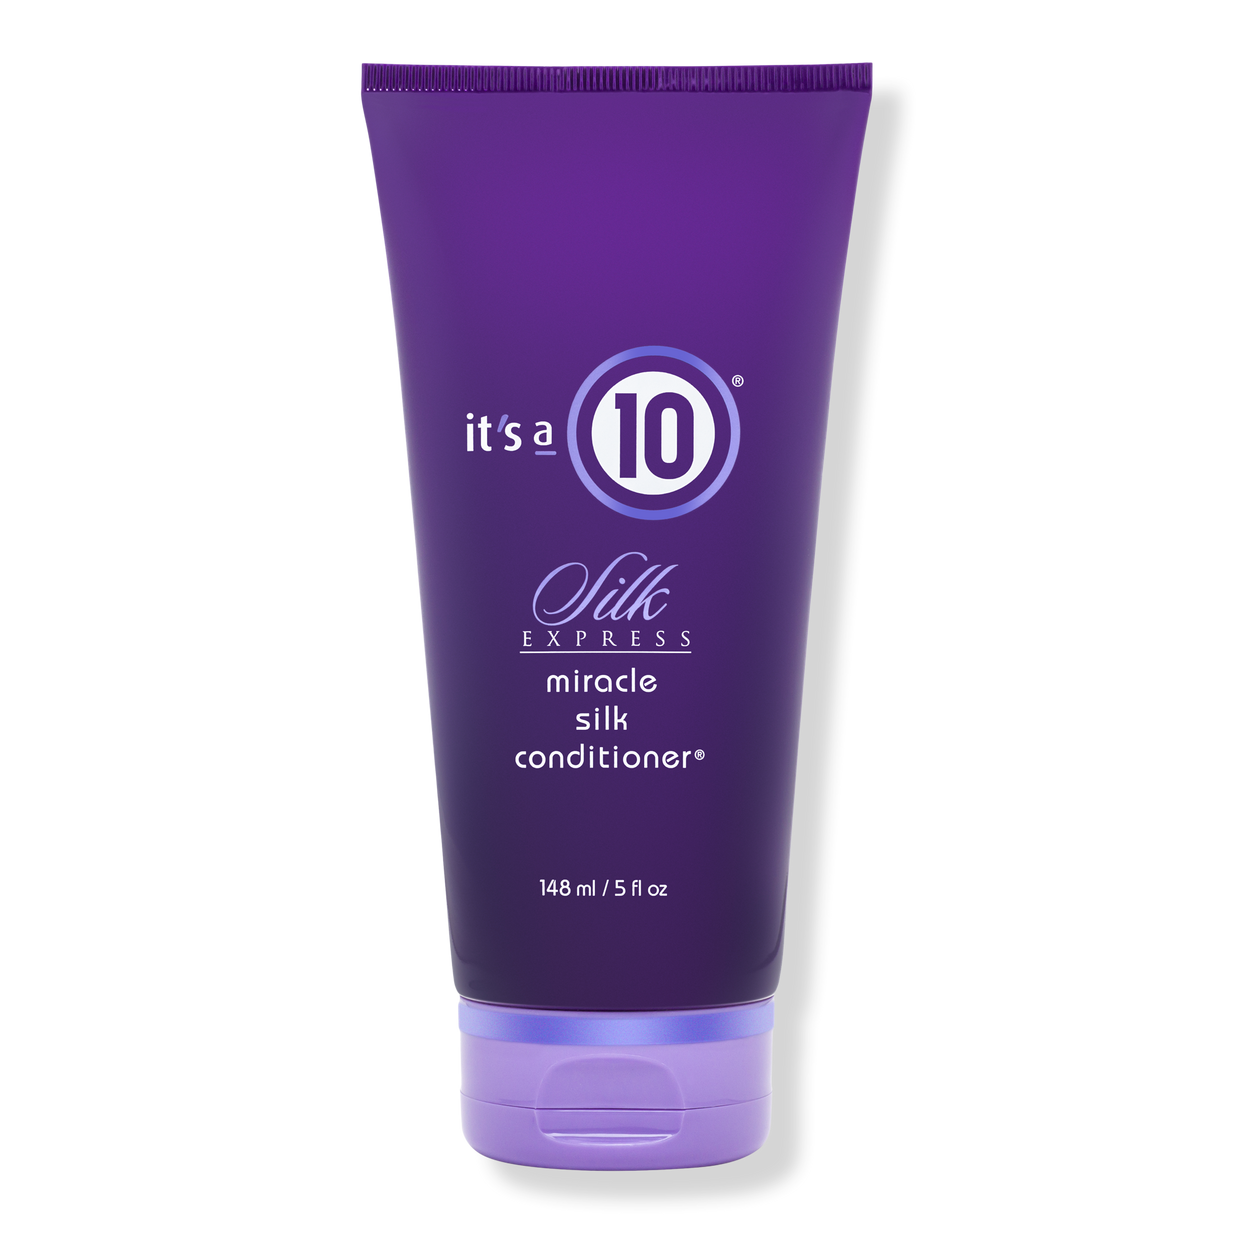 it's a 10 silk express miracle silk leave-in